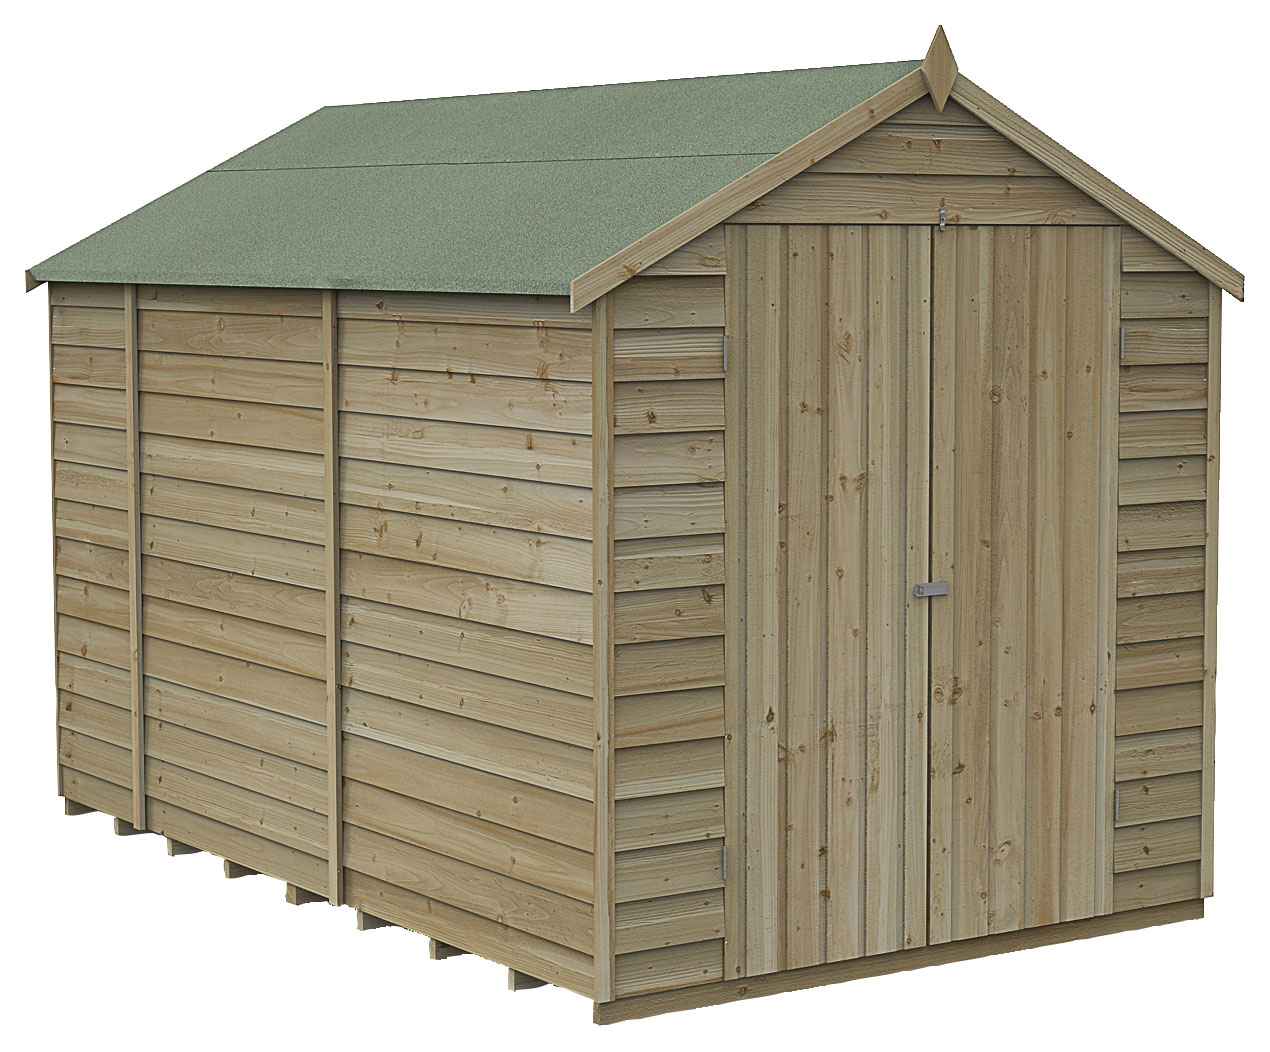 Forest Garden 6 x 10ft 4Life Apex Overlap Pressure Treated Double Door Windowless Shed with Assembly